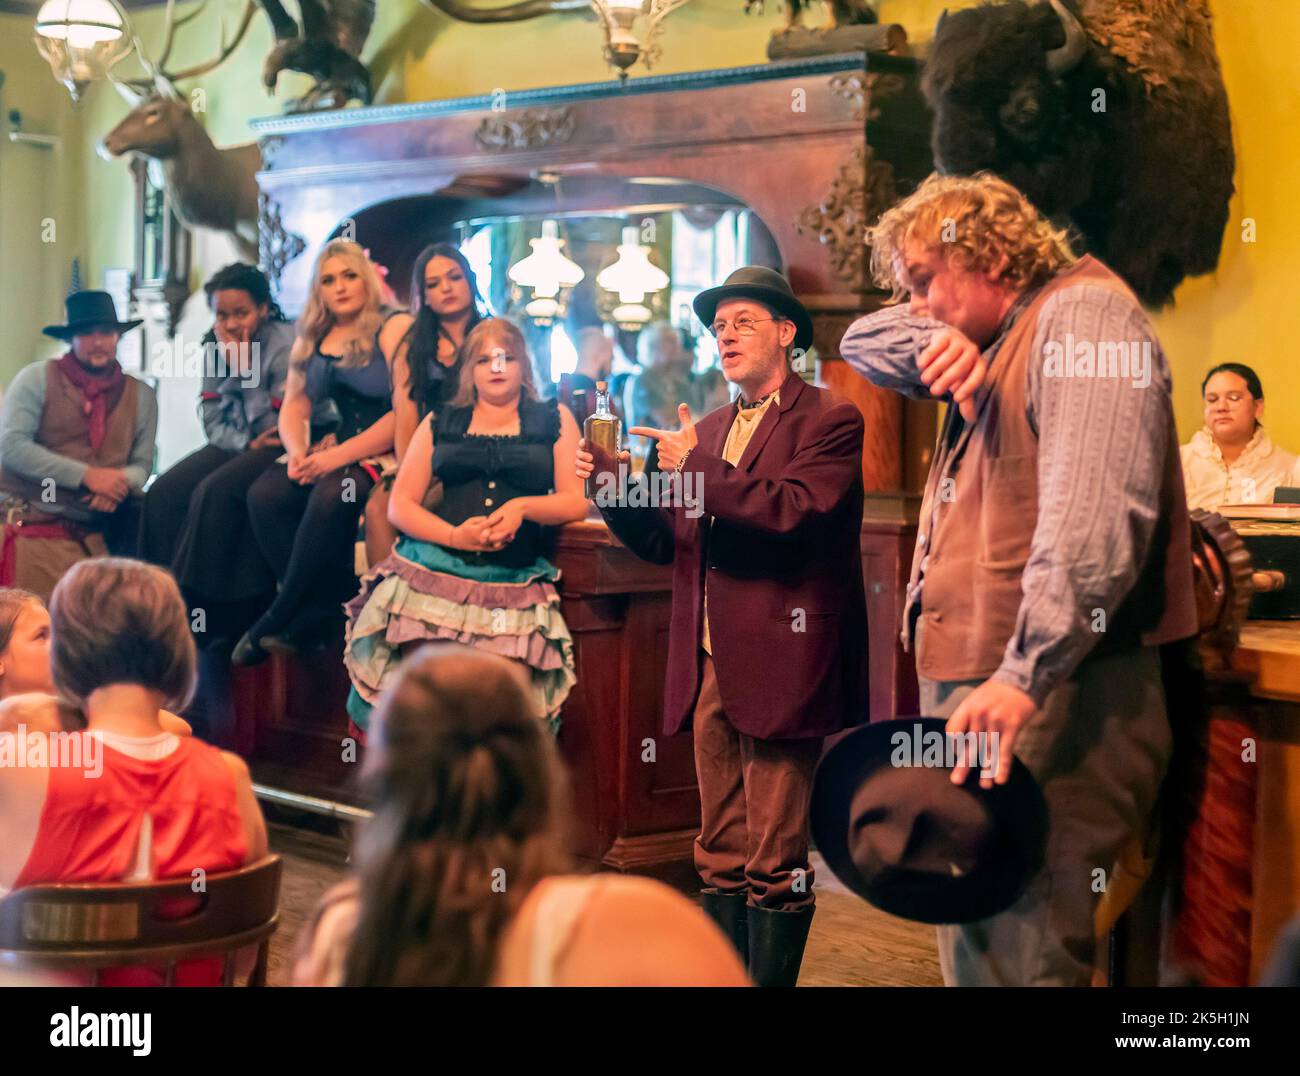 Dodge City, Kansas - The reenactment of a Medicine Show at Boot Hill Museum. The museum preserves the history and culture of the old west. Located on Stock Photo